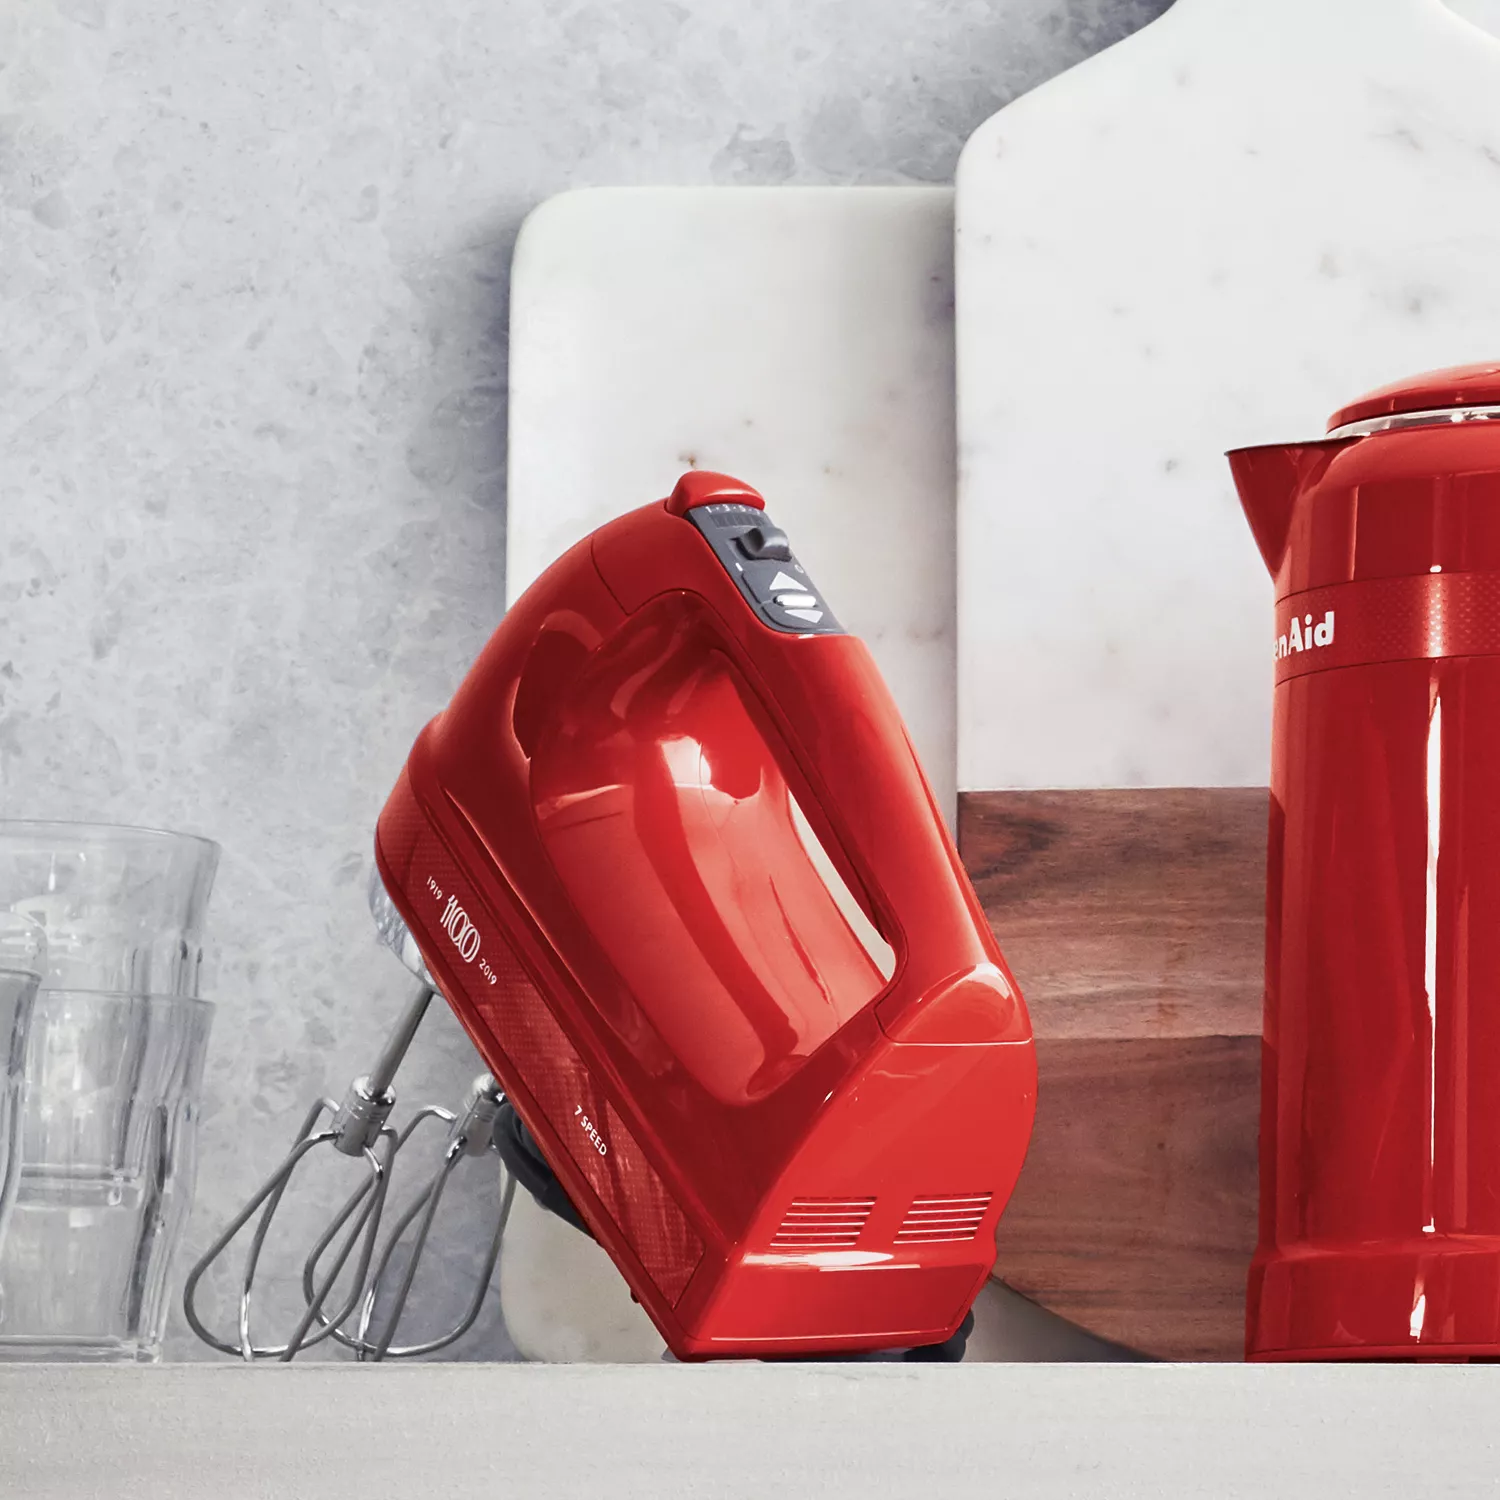 KitchenAid Queen of Hearts 7-Speed Hand Mixer Review